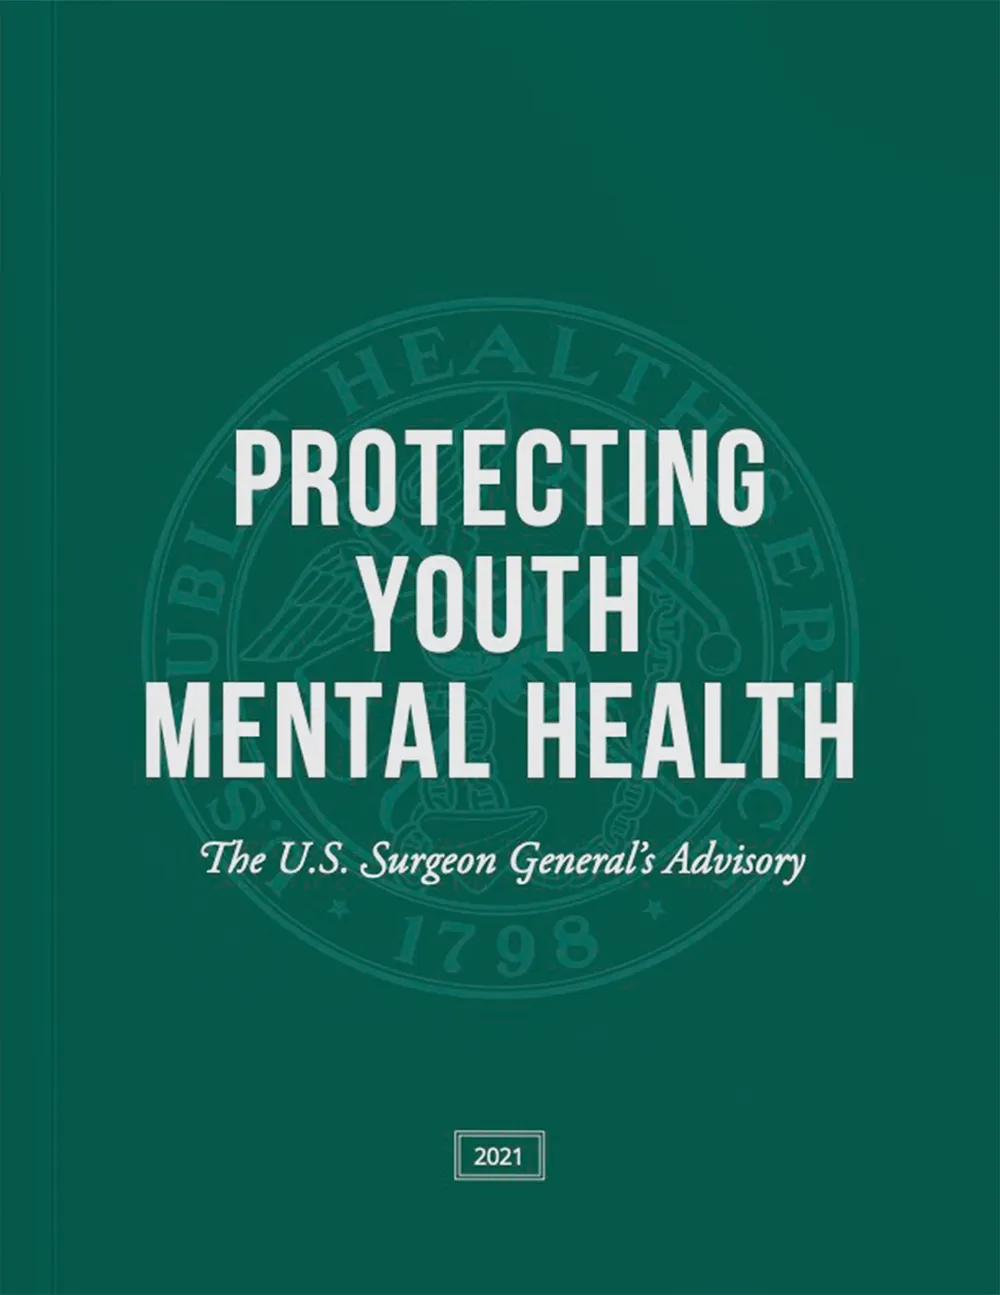 Youth Mental Health — Current Priorities of the U.S. Surgeon General